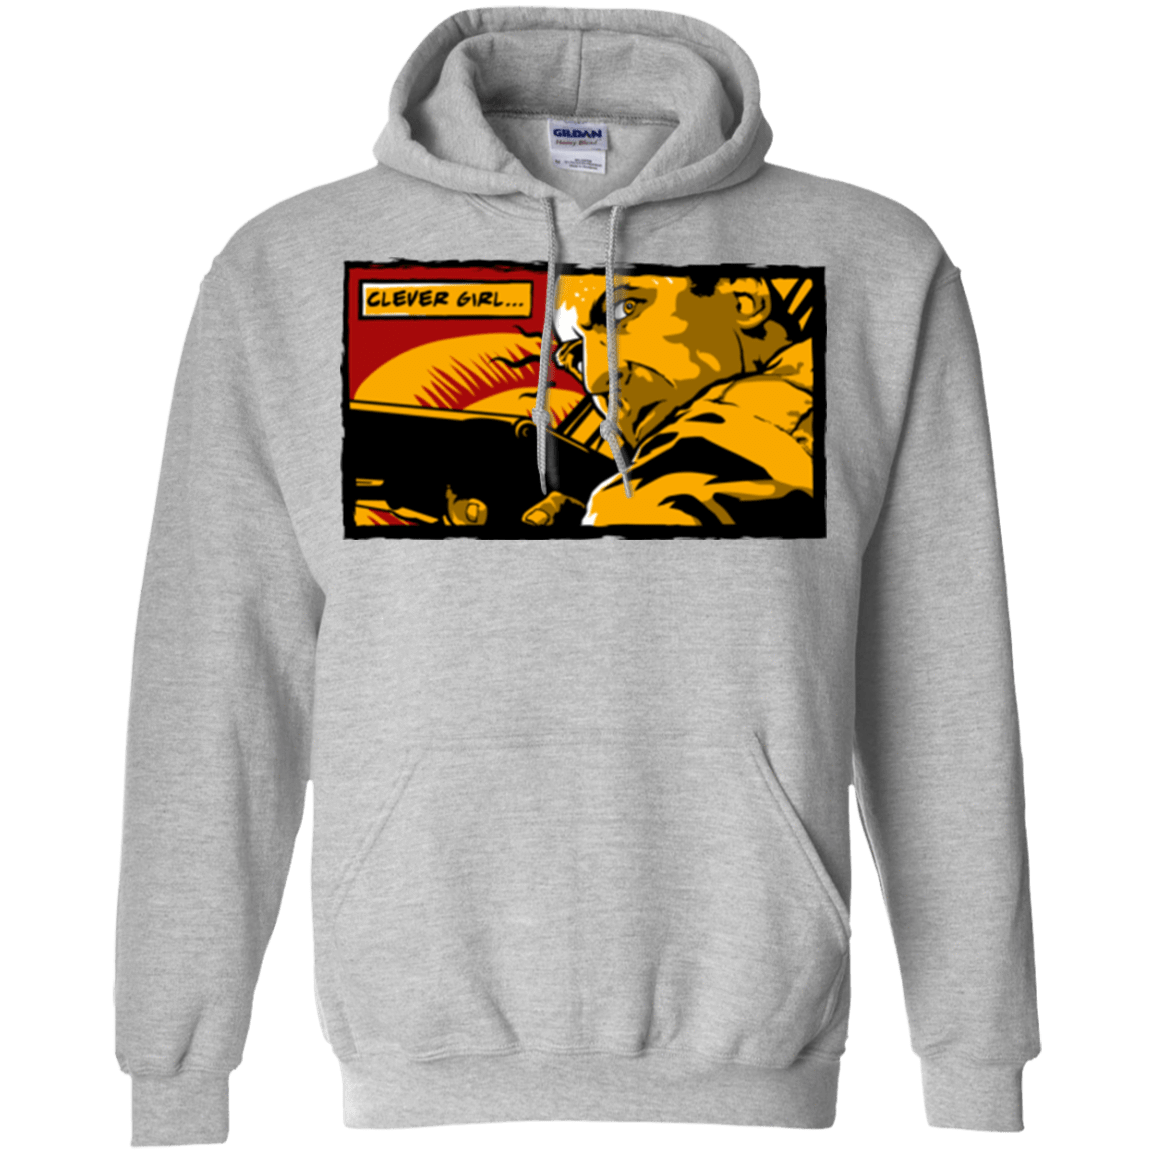 Sweatshirts Sport Grey / Small Clever Girl Pullover Hoodie